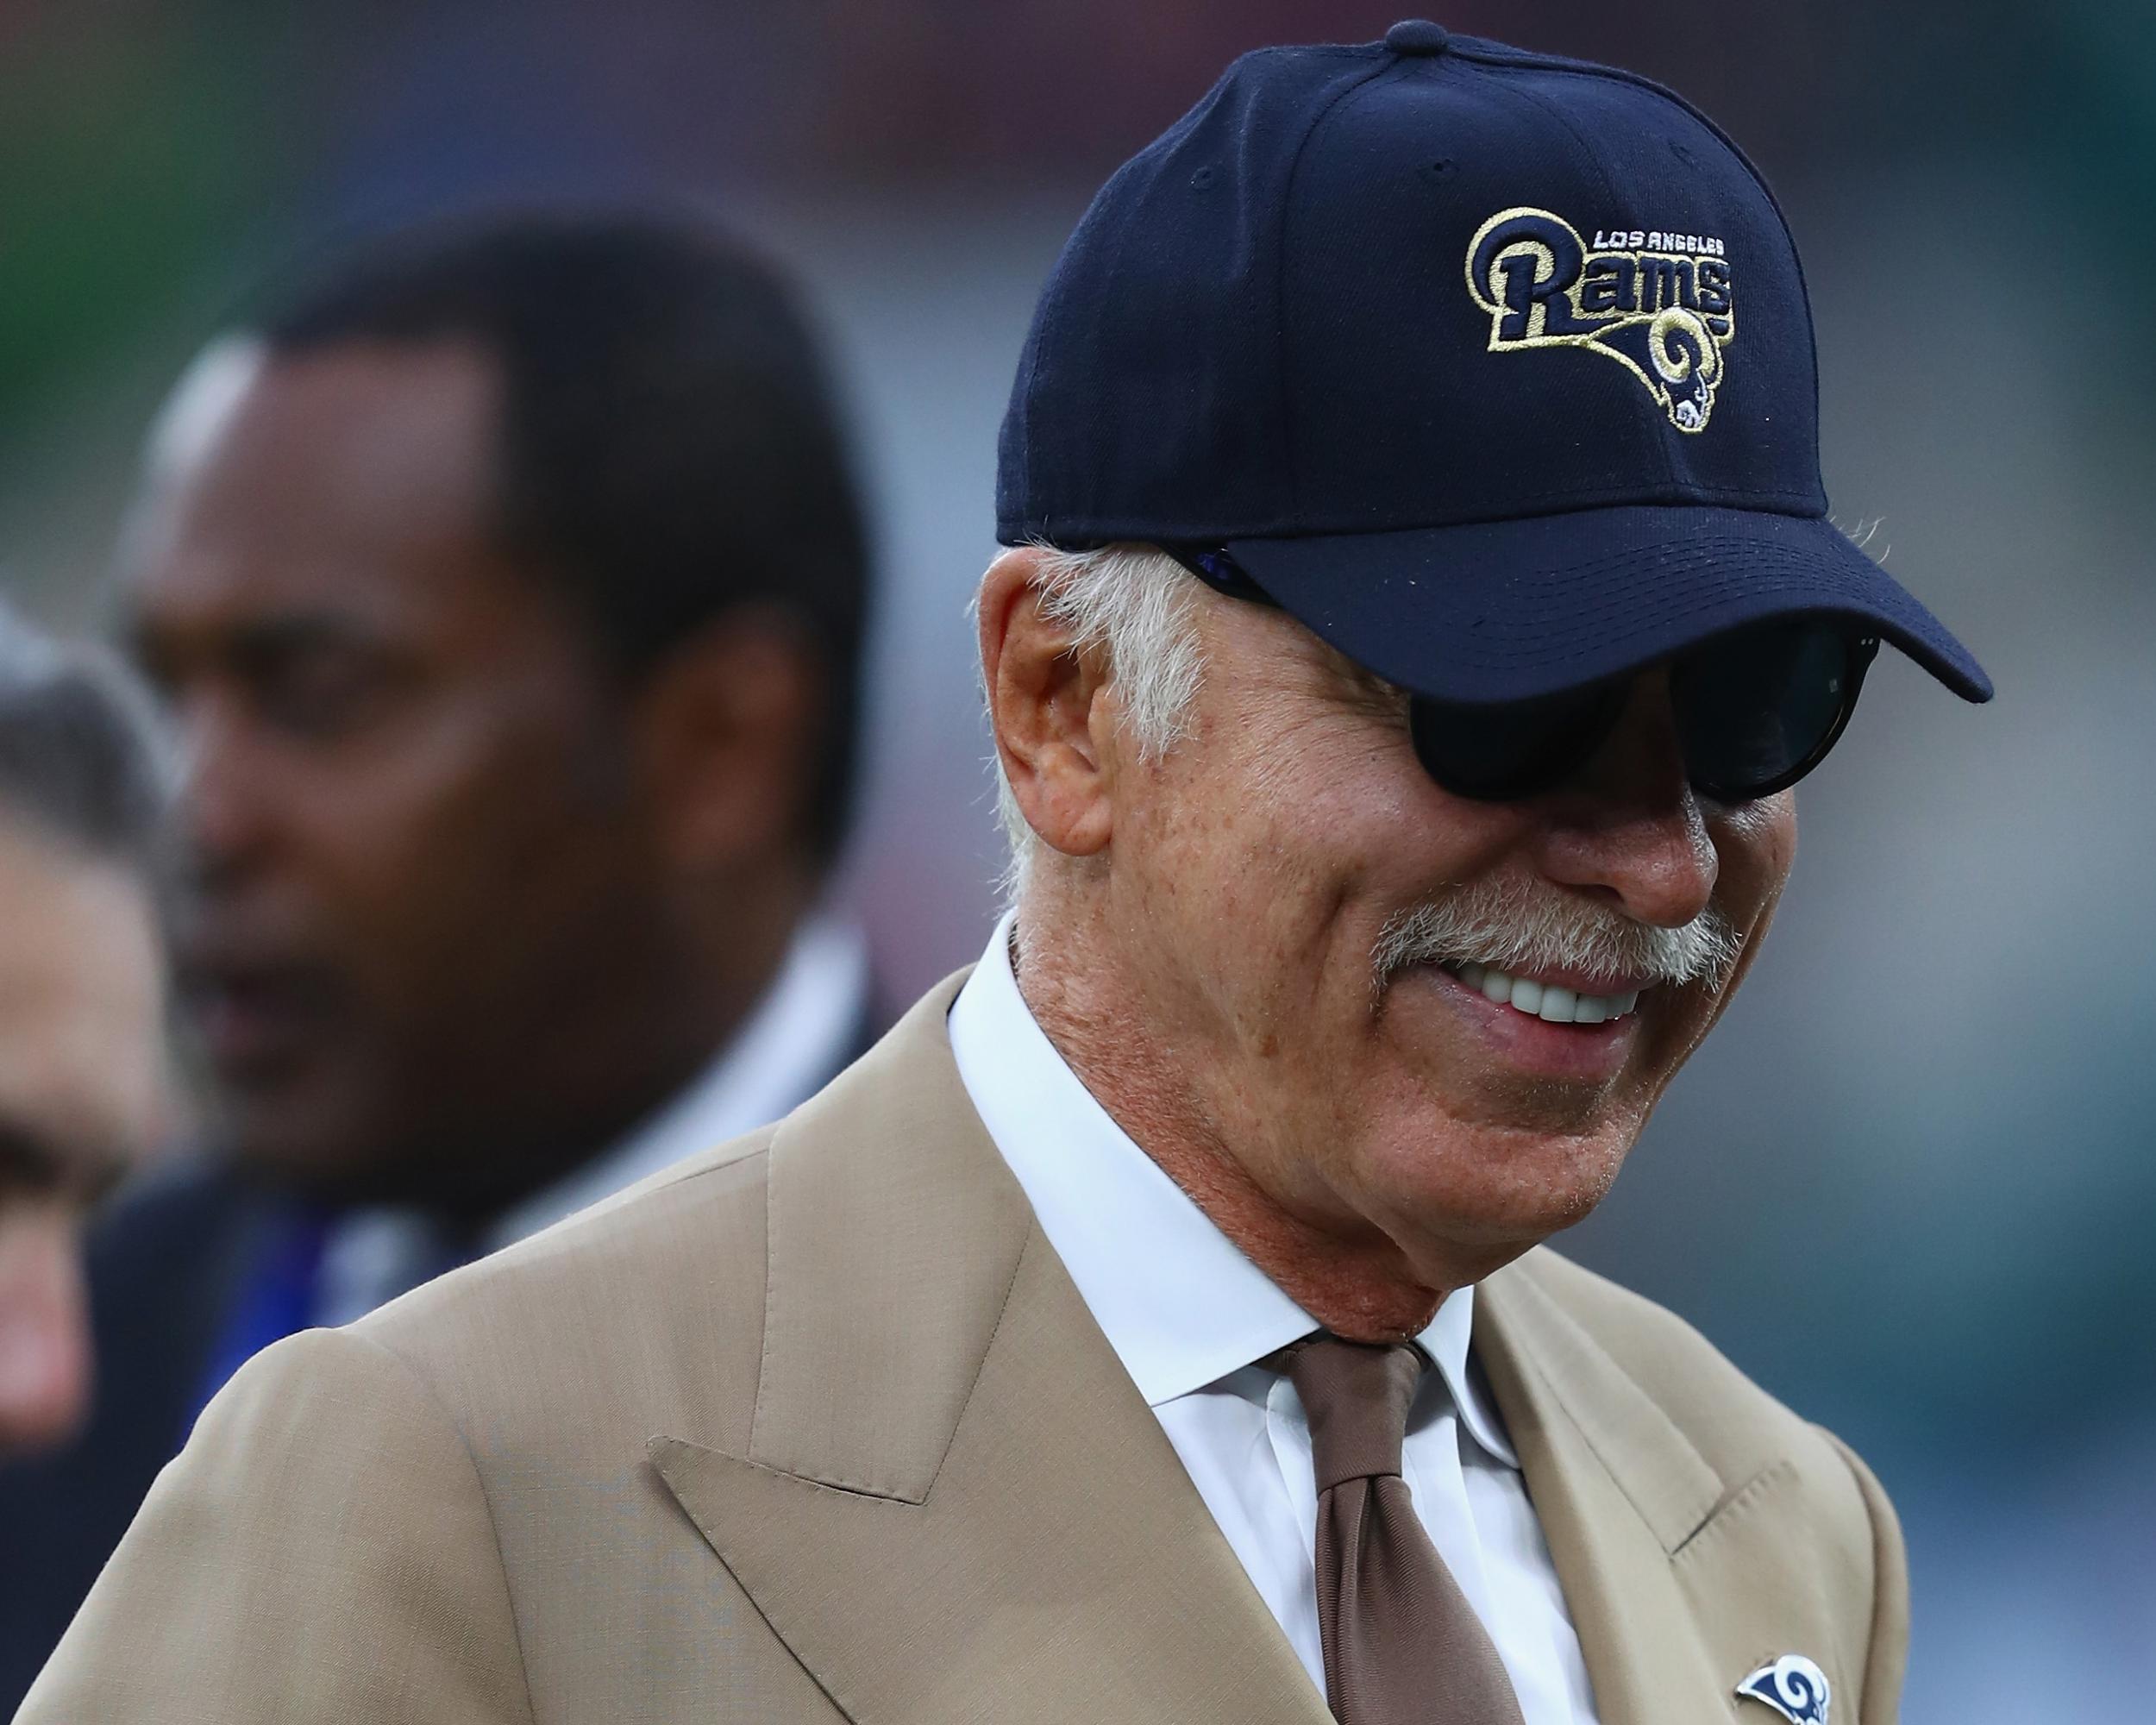 &#13;
Kroenke is an absent owner despite being a regular attendee at the AGM &#13;